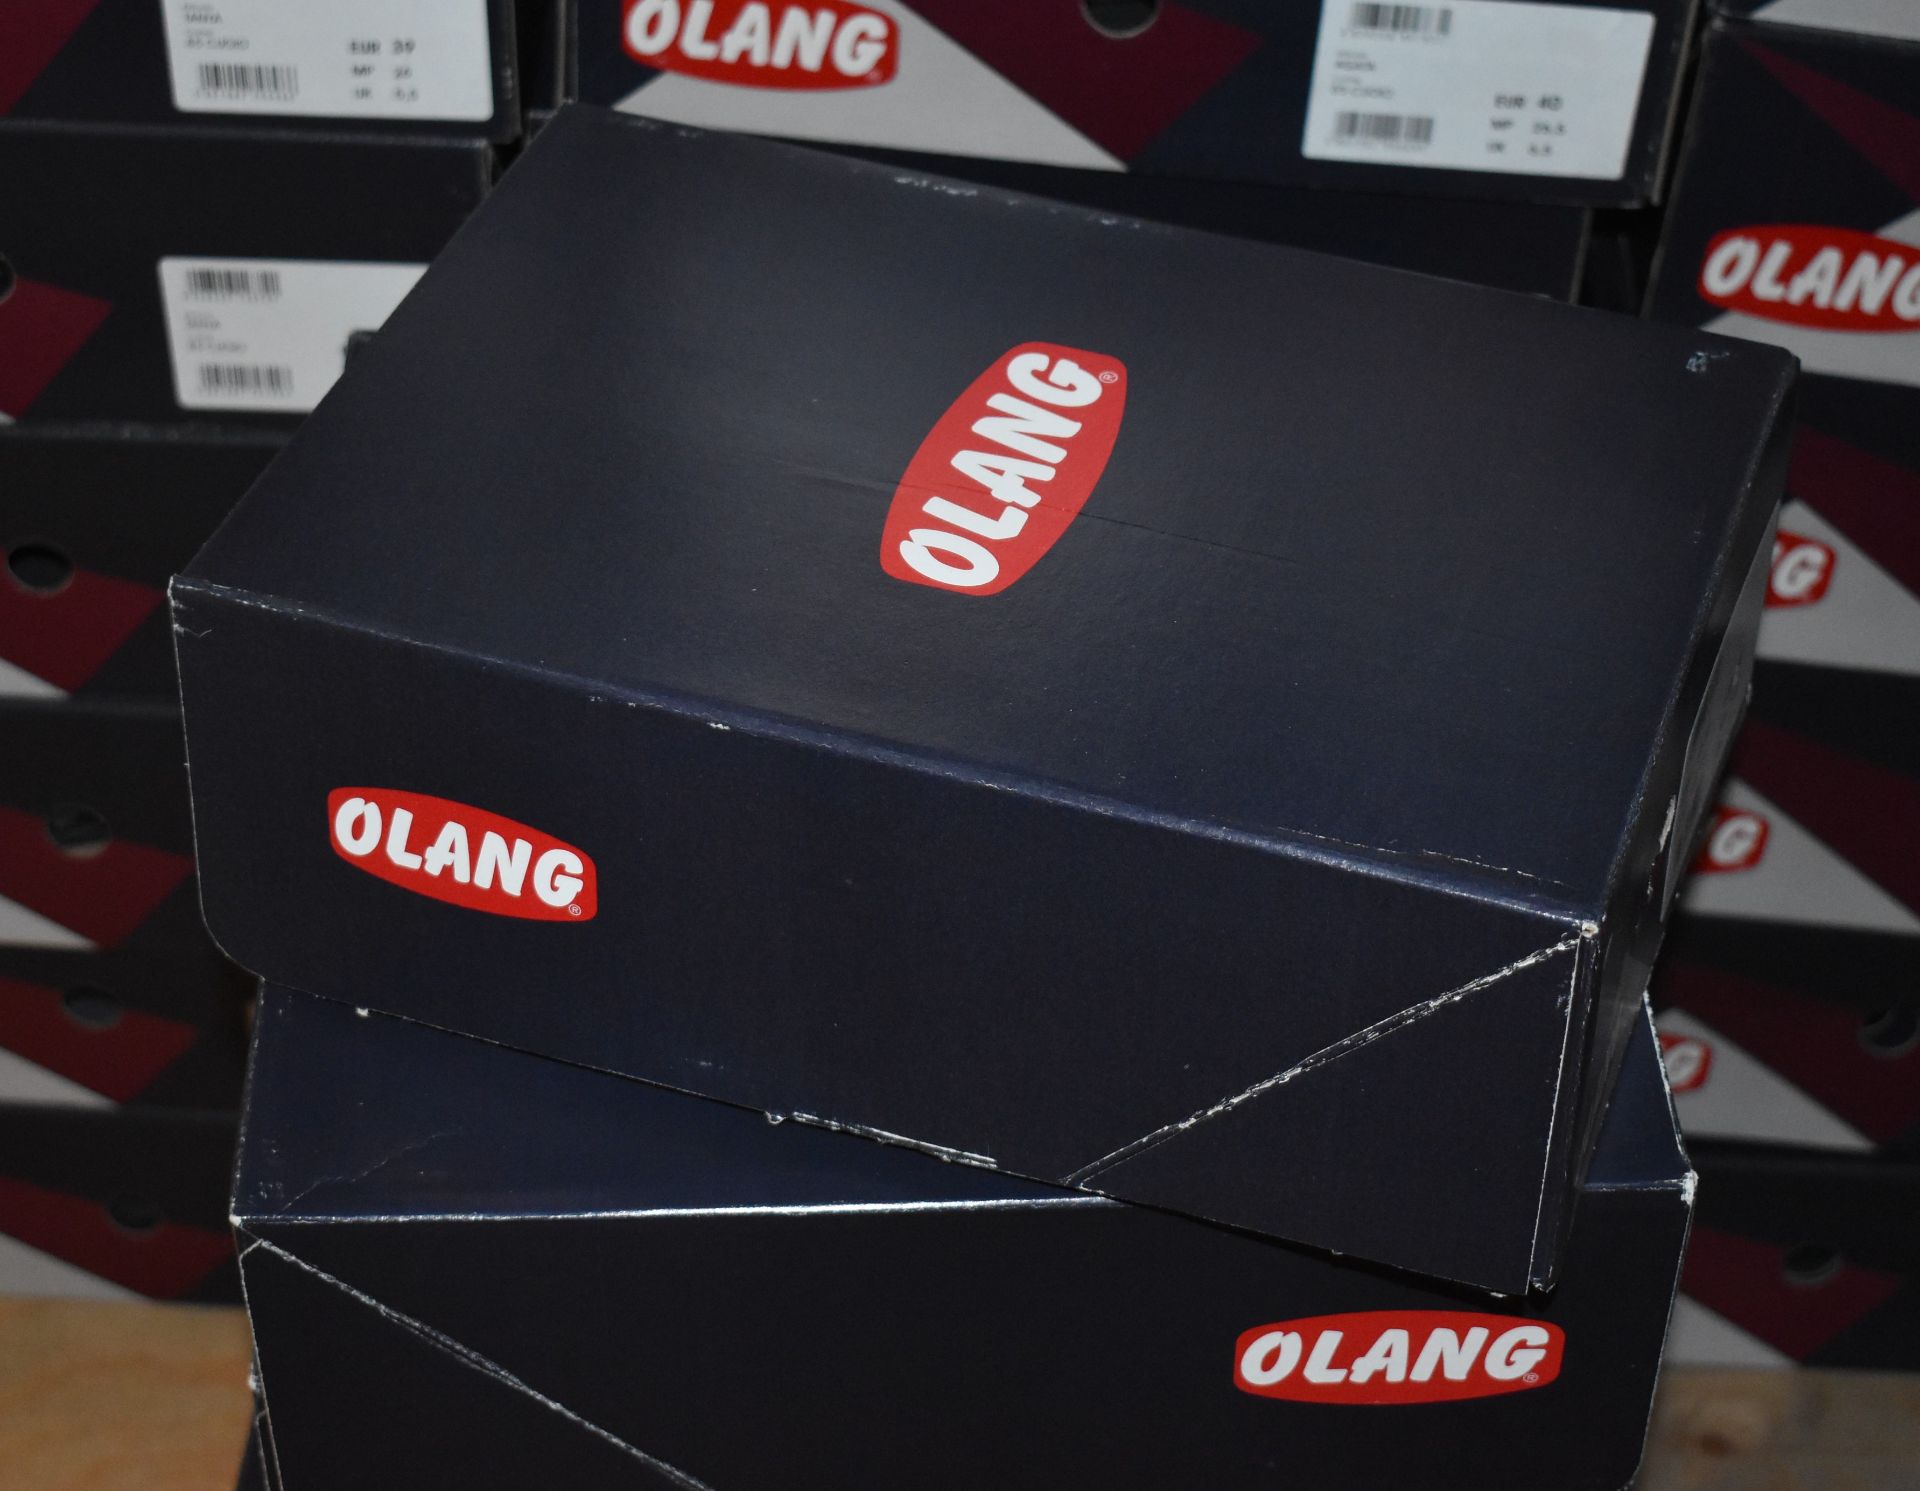 1 x Pair of Designer Olang Merano 82 Blu Women's Winter Boots - Euro Size 41 - Brand New Boxed Stock - Image 3 of 4